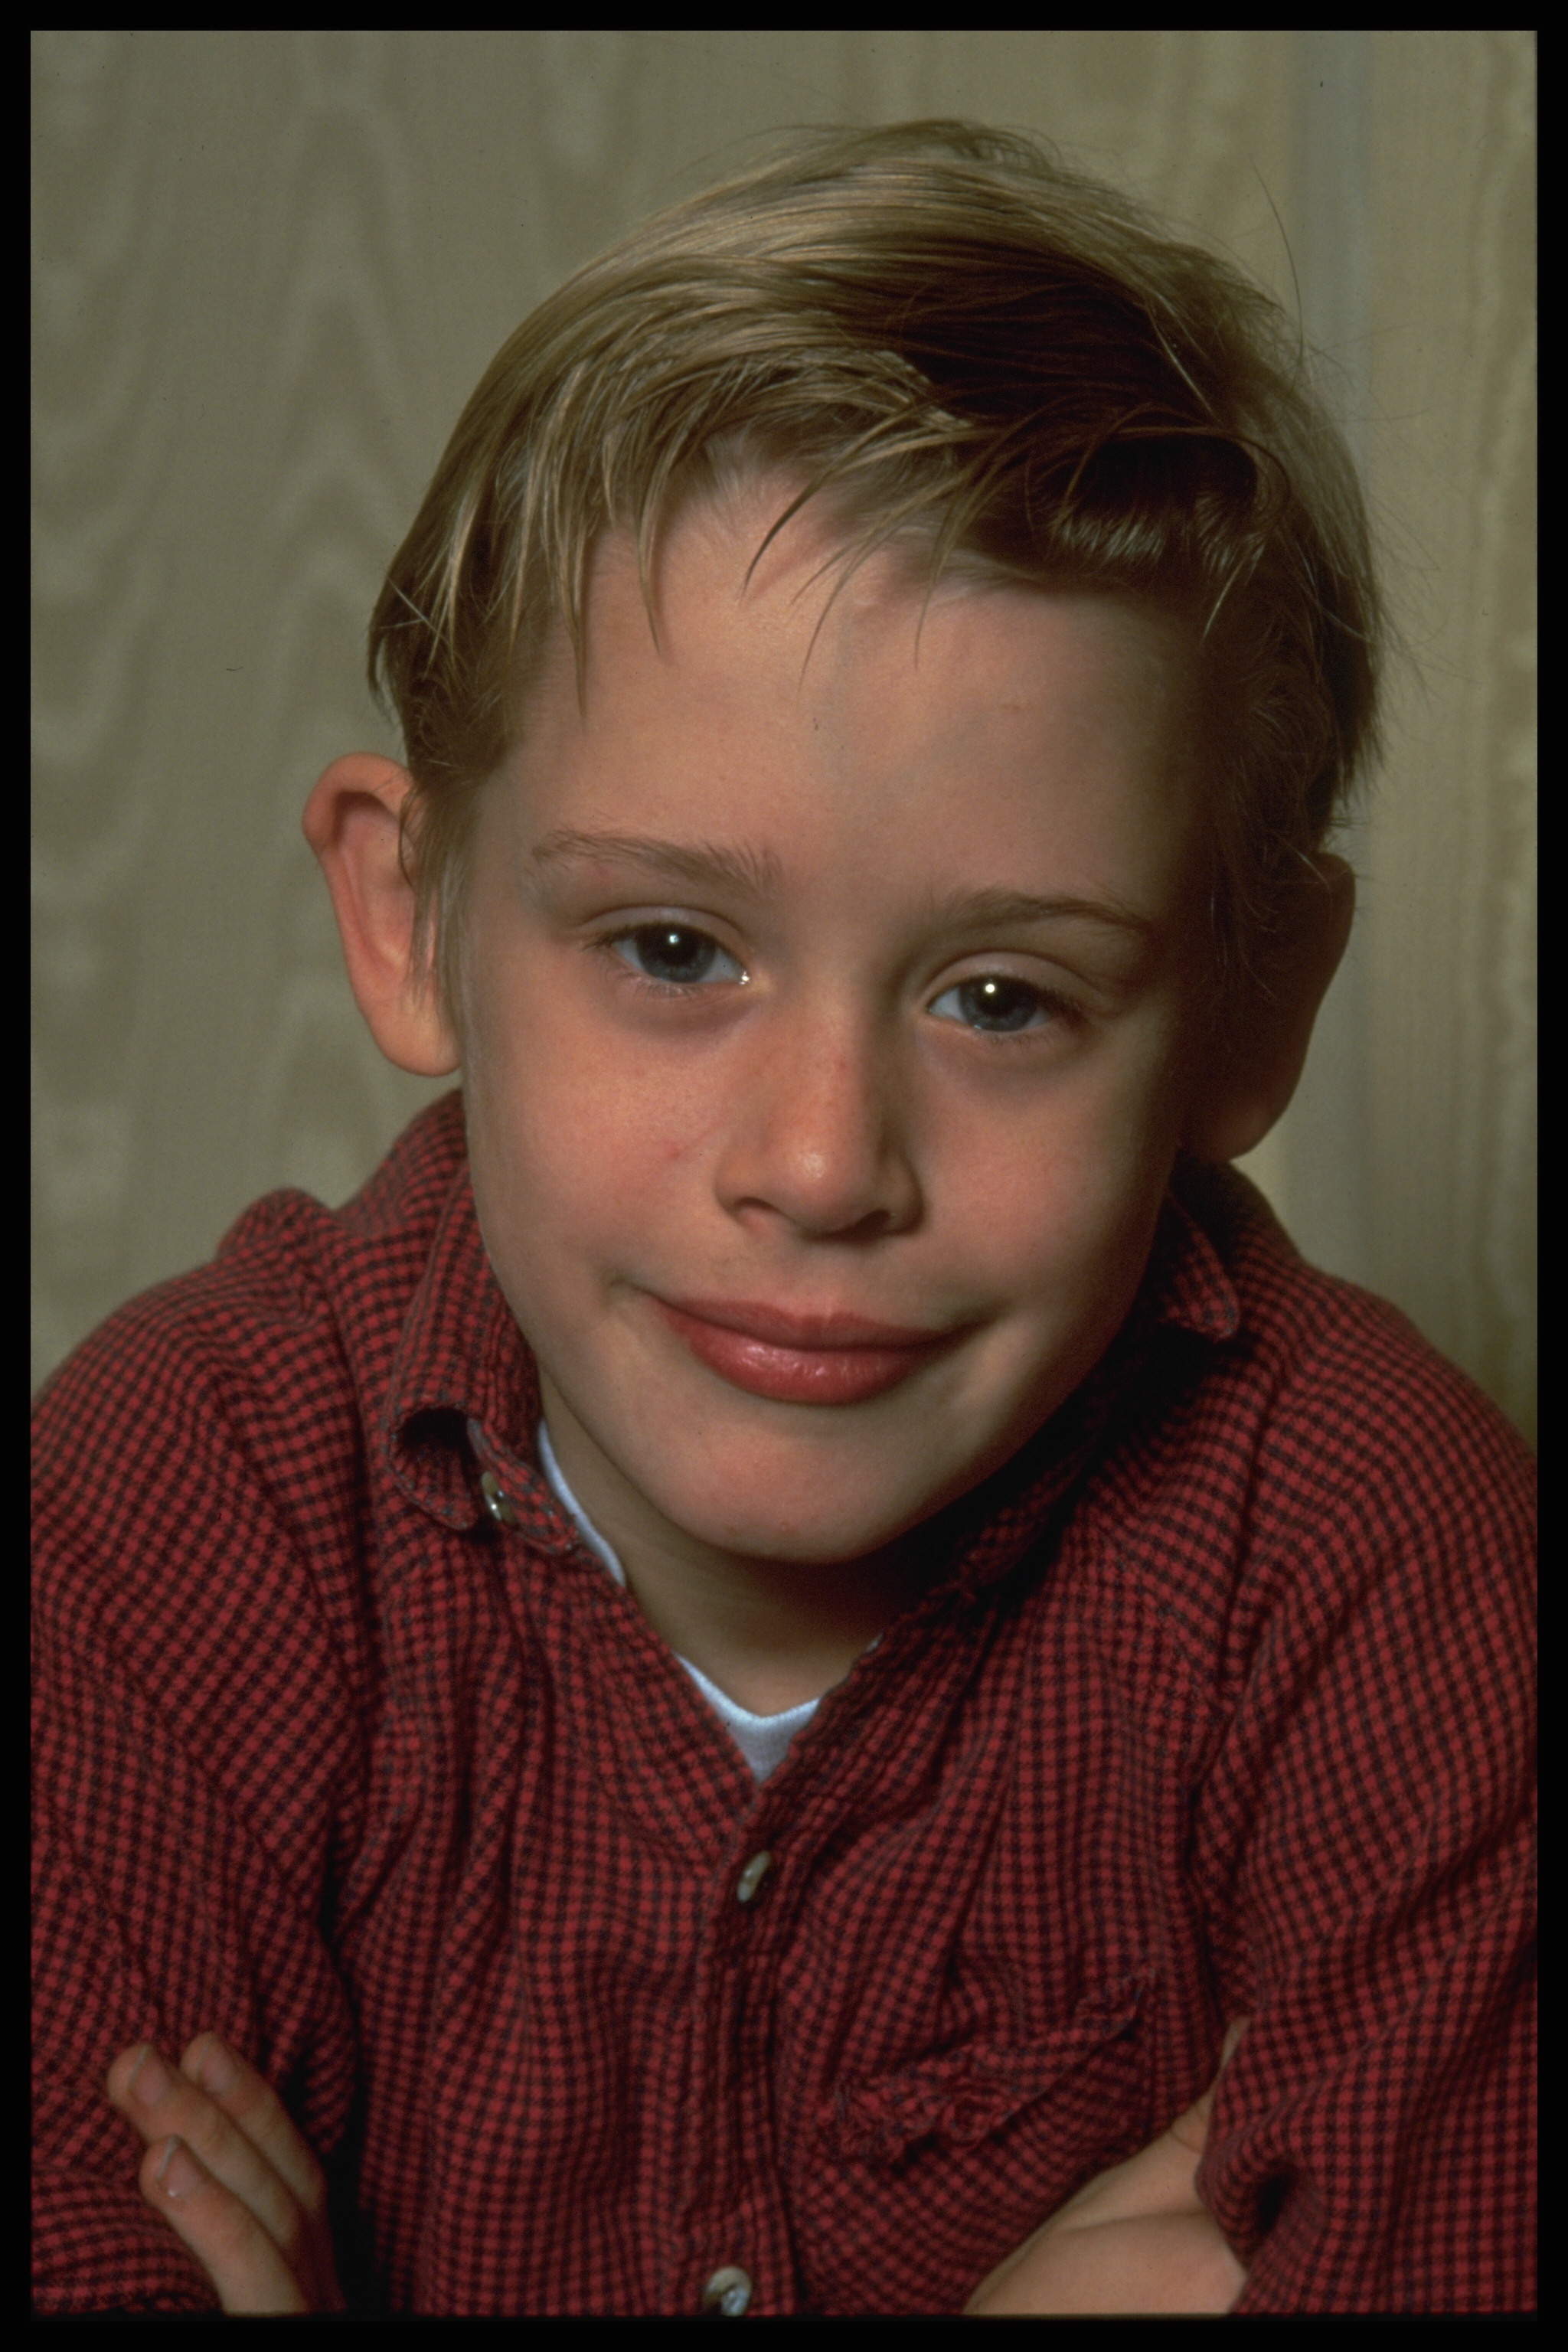 Macaulay Culkin pictured in 1991. | Source: Getty Images